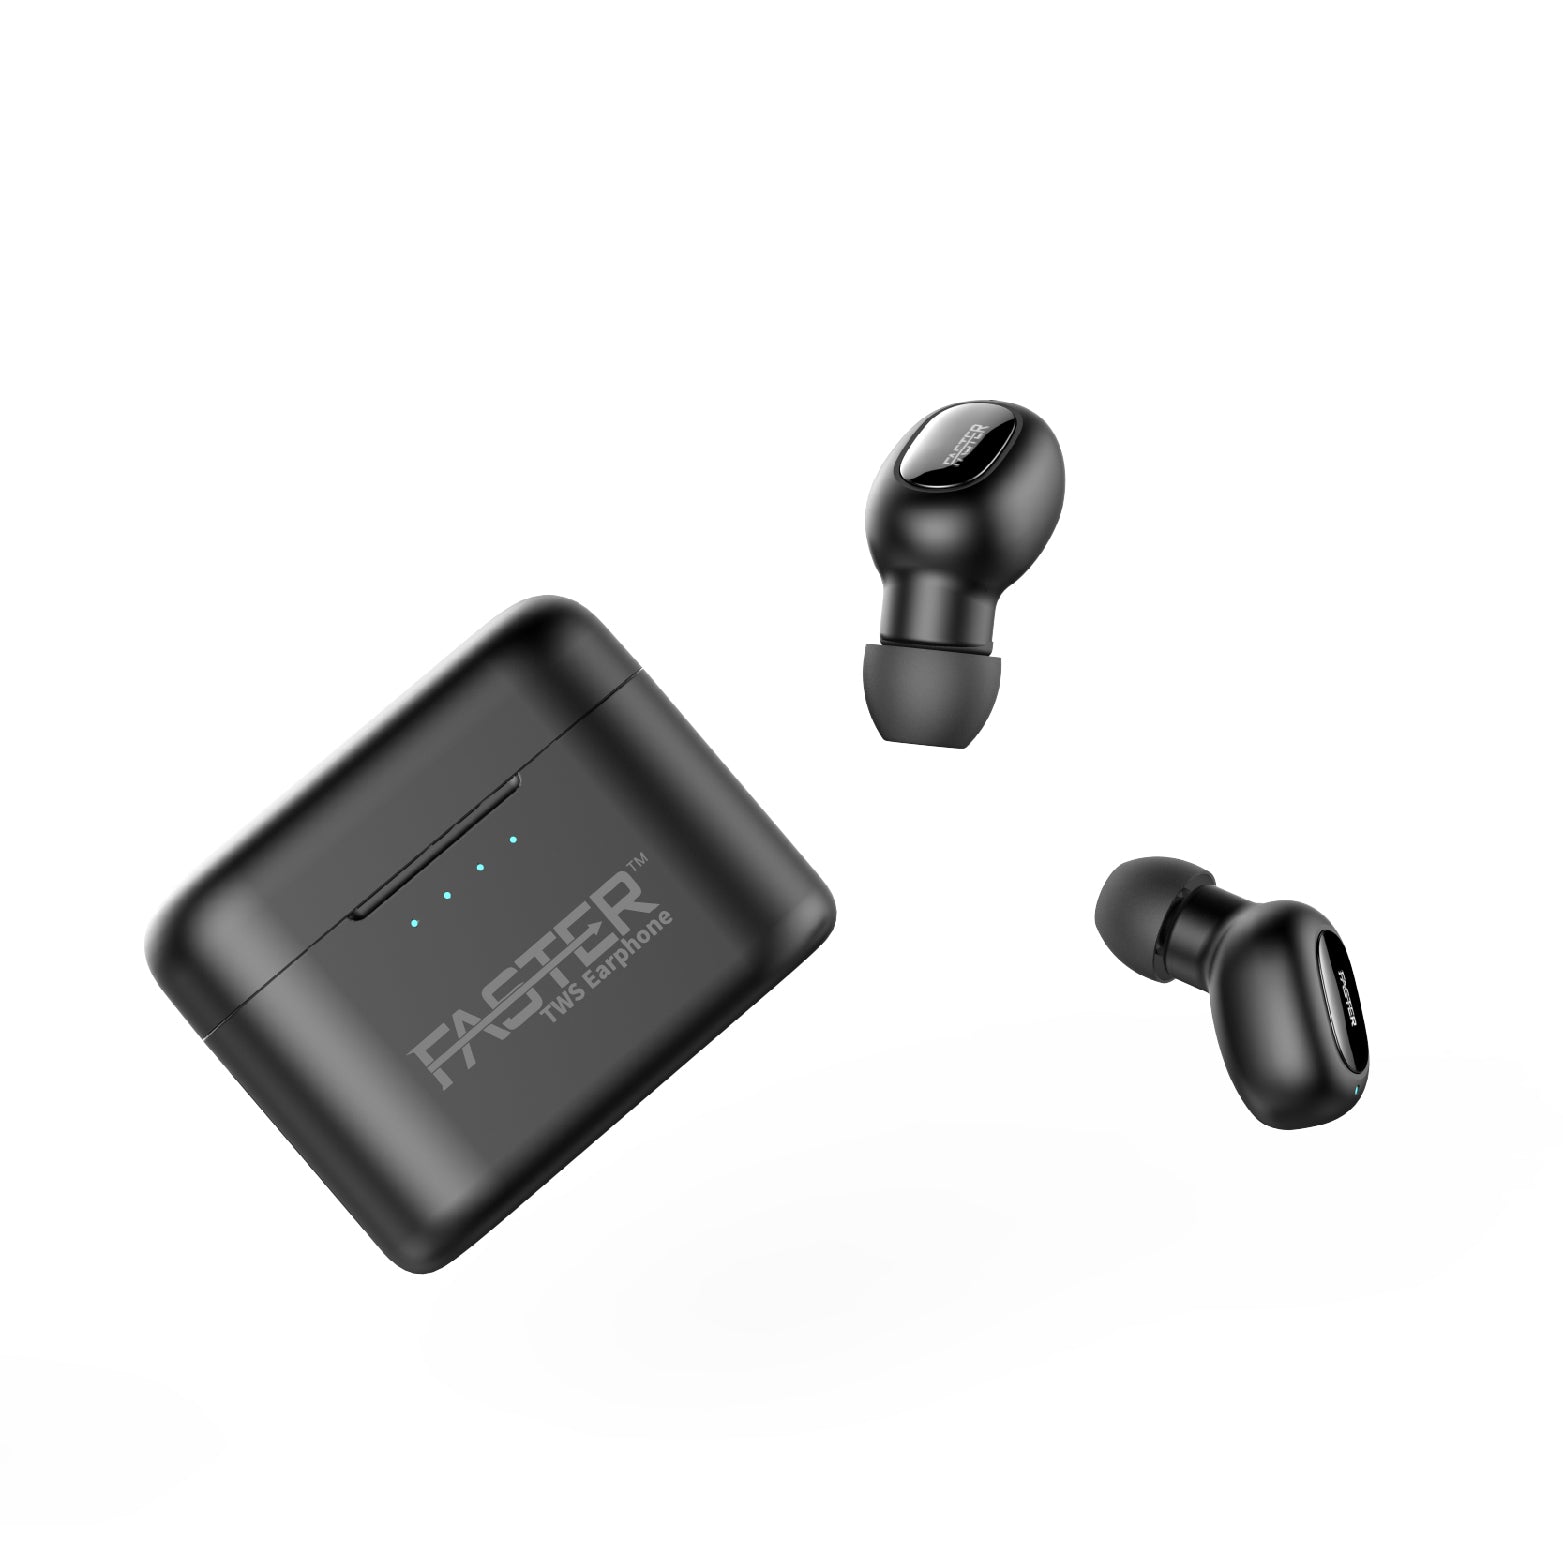 Faster S600 TWS Stereo Wireless Earbuds Price in Pakistan